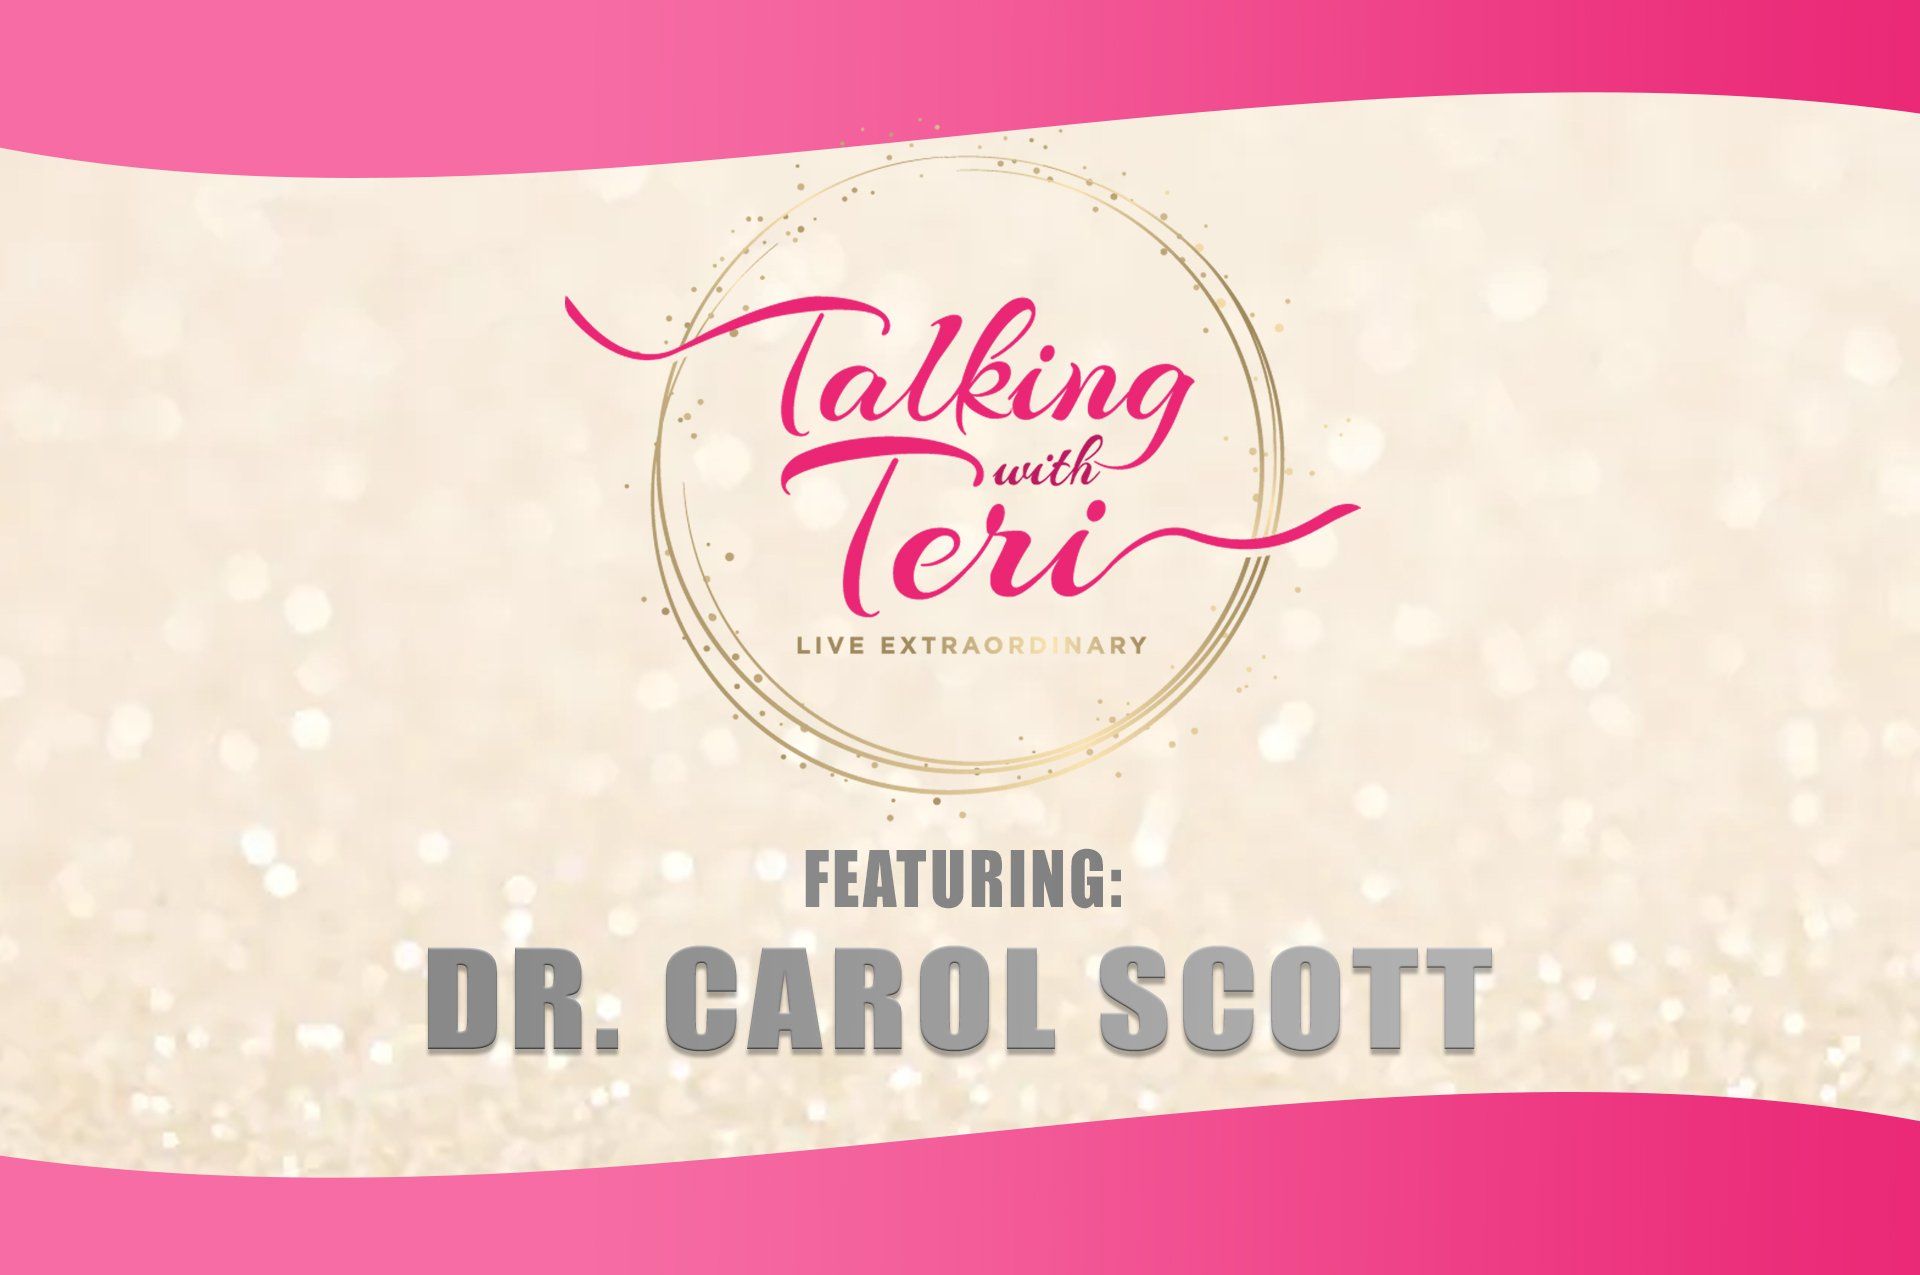 Talking With Teri and Dr. Carol Scott